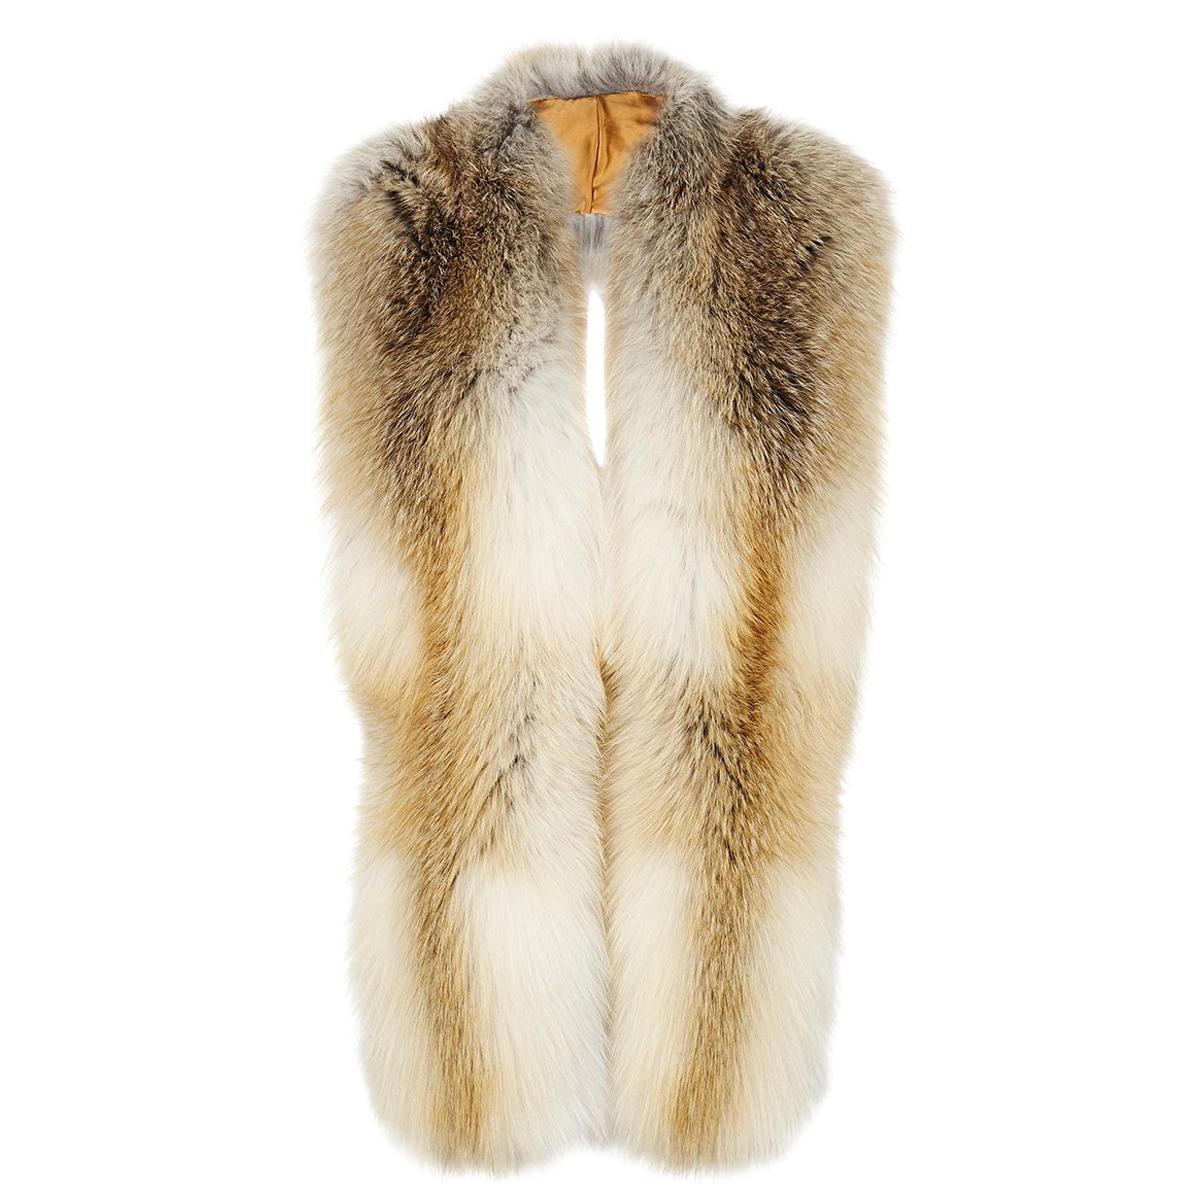 This Natural Collection is Verheyen London’s versatile collection for country or city wear, crafted in the finest and highest quality origin assured natural fox.  A structured design to wrap around you for country weekend getaways and for a